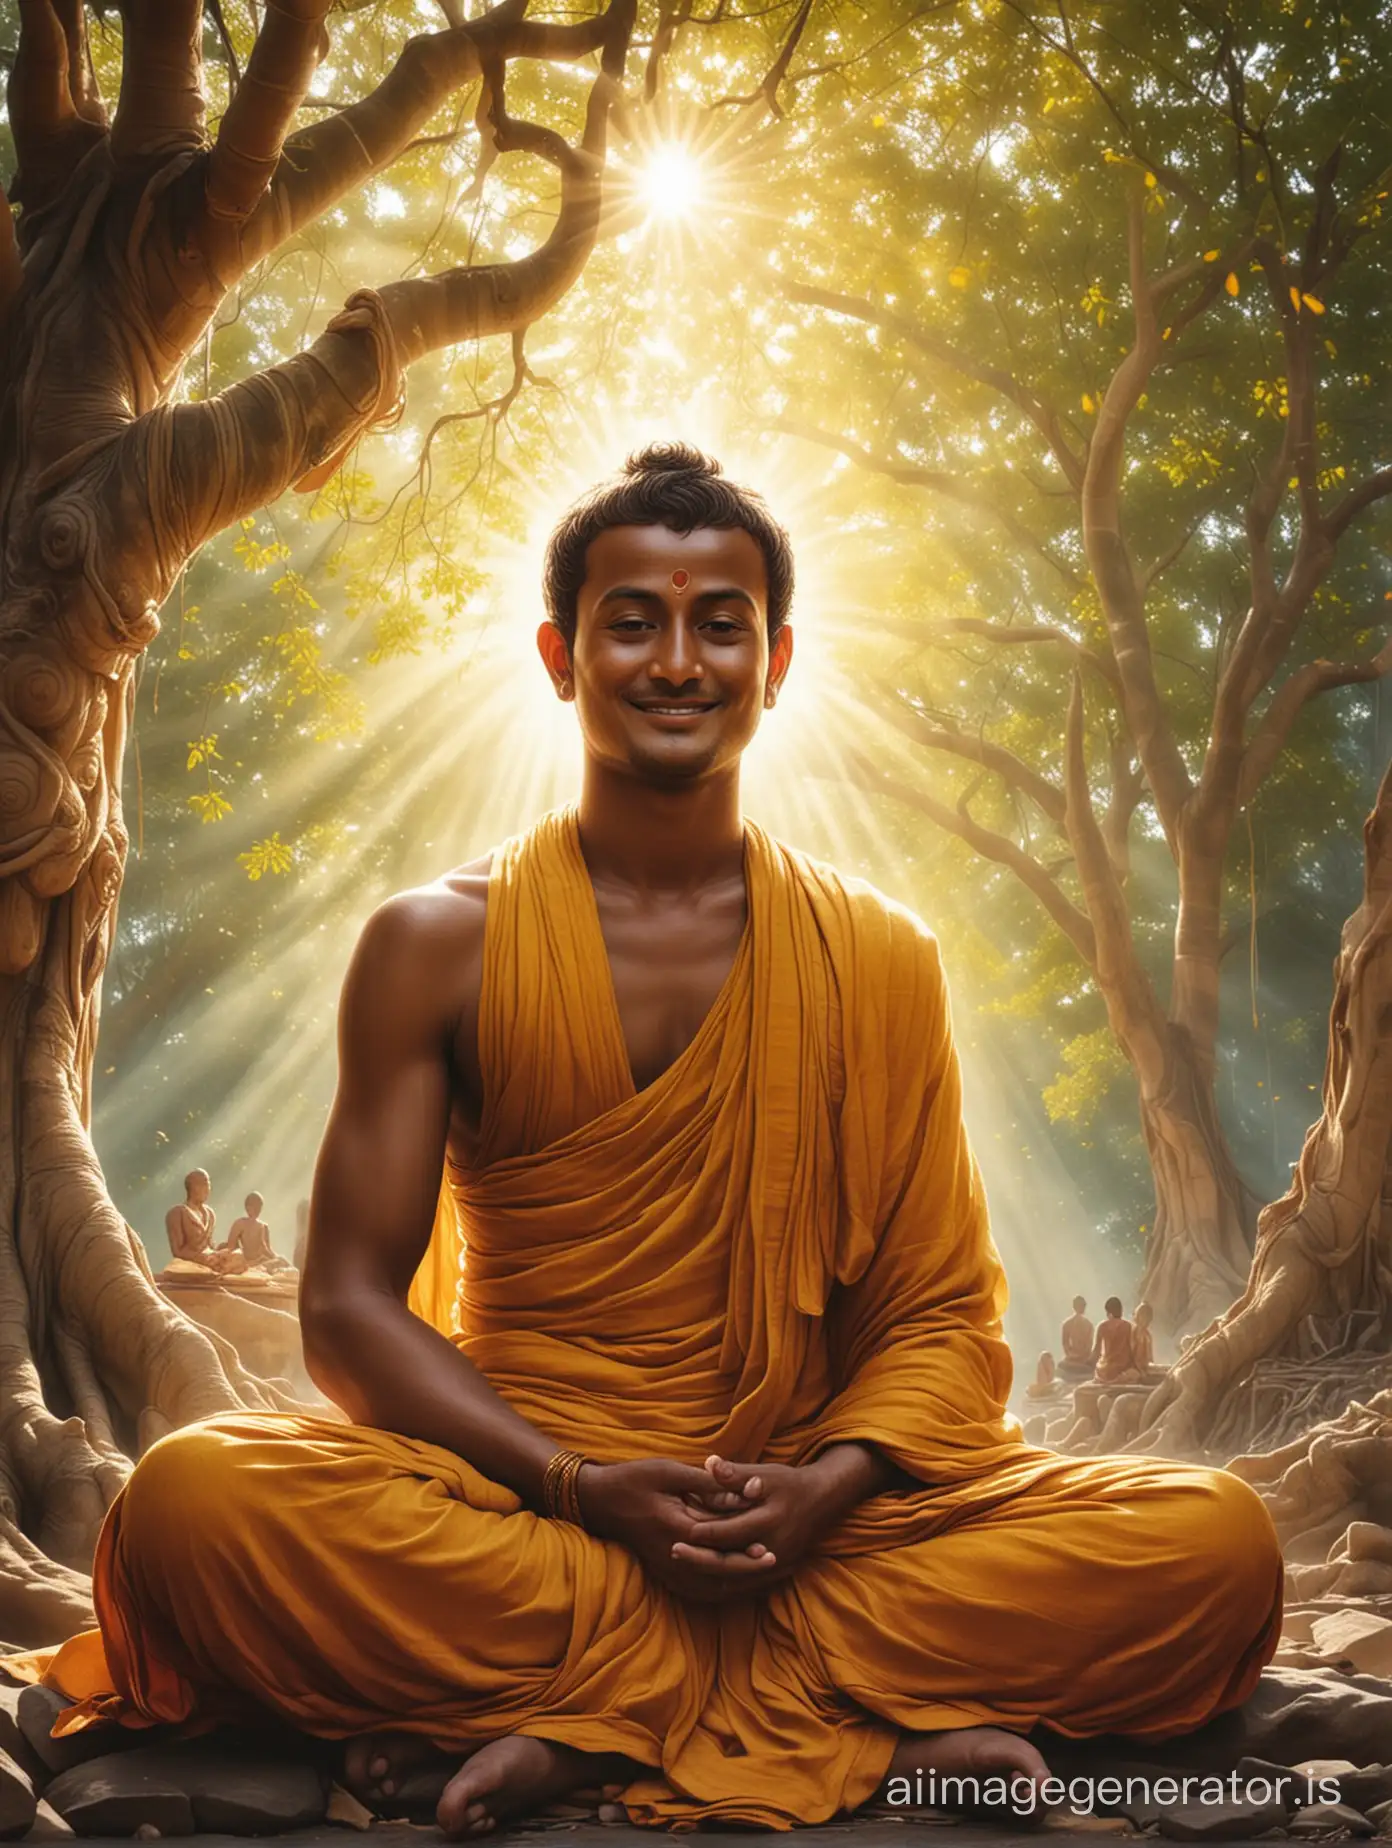 Generate an image of Siddhartha with a radiant smile on his face, surrounded by an aura of light, signifying his attainment of enlightenment sitting under the Bodhi tree.